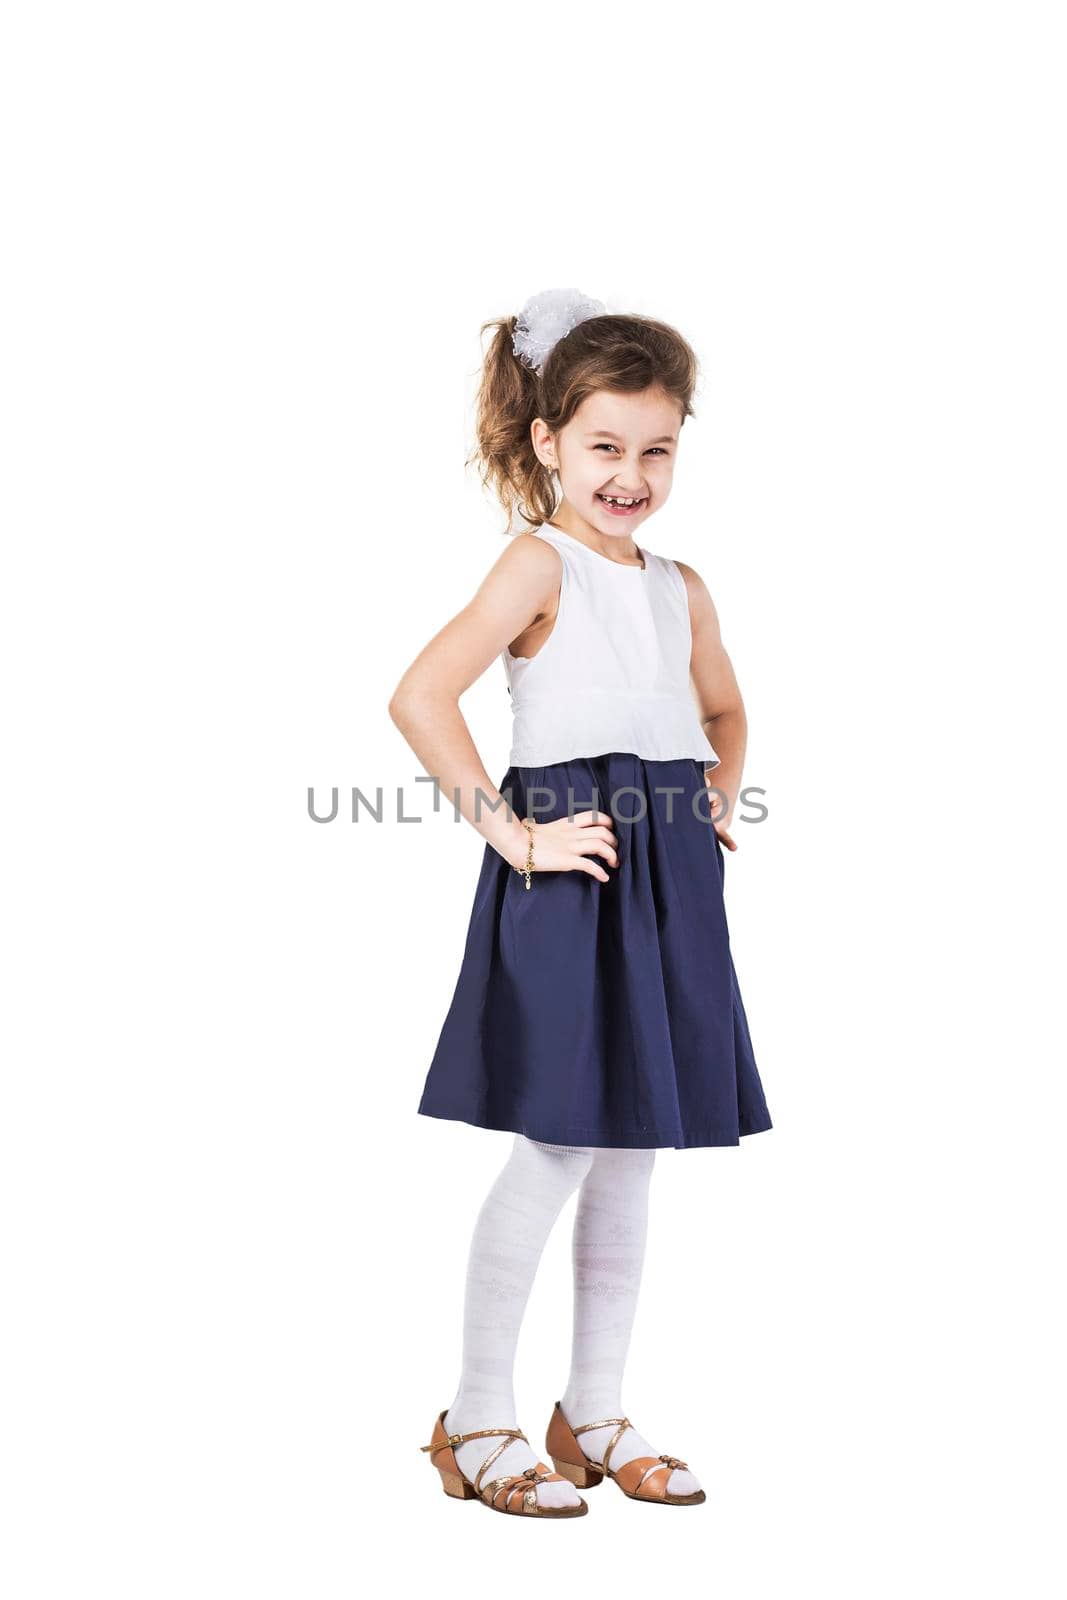 portrait of a happy six-year-old girl against white background by SmartPhotoLab